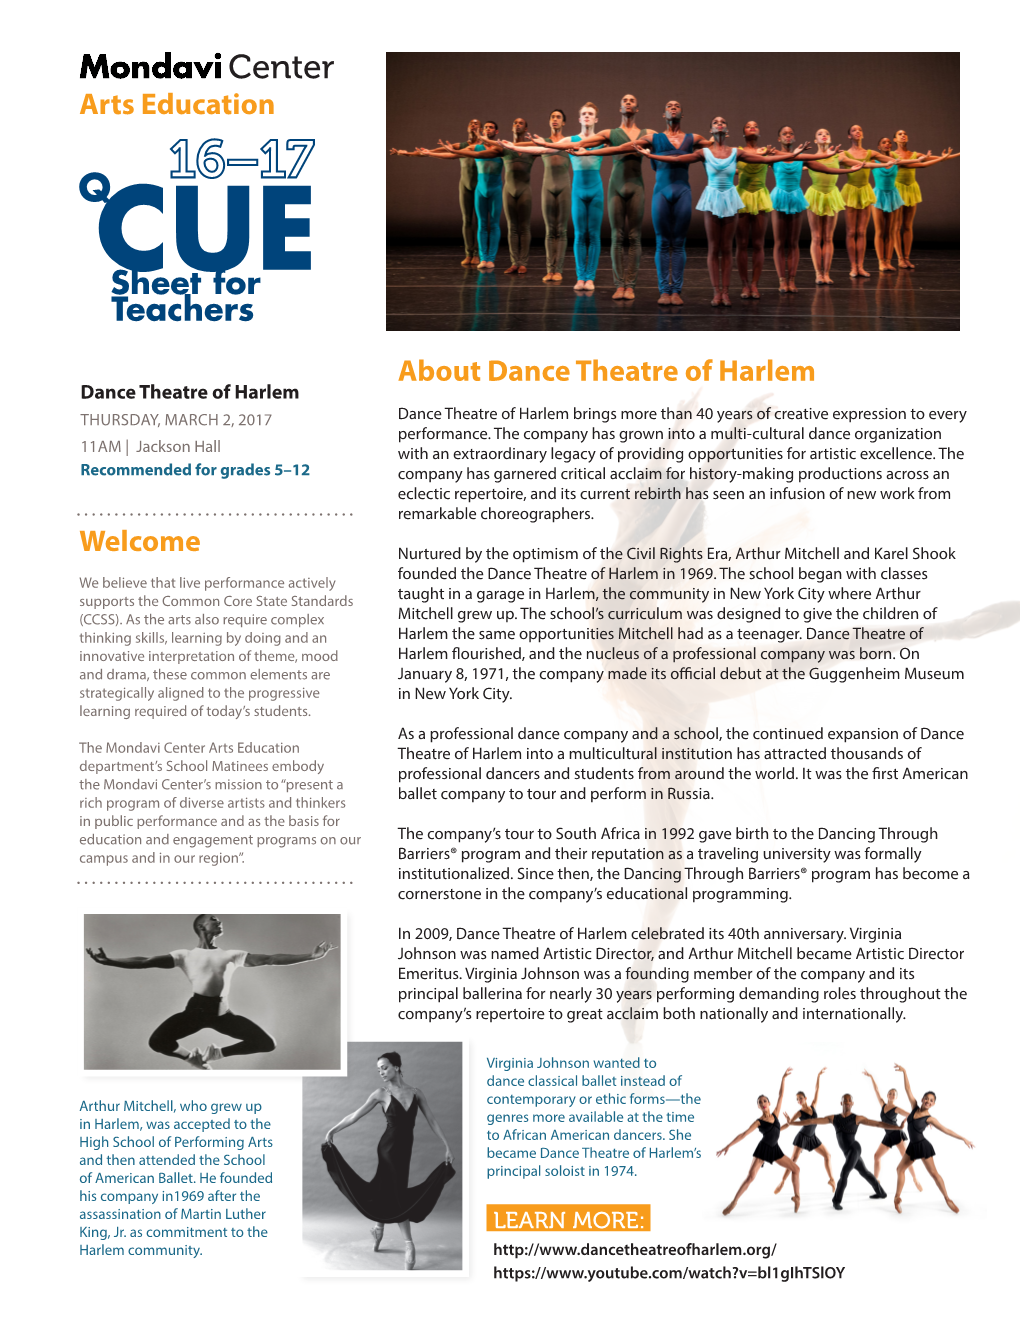 Arts Education Welcome About Dance Theatre of Harlem